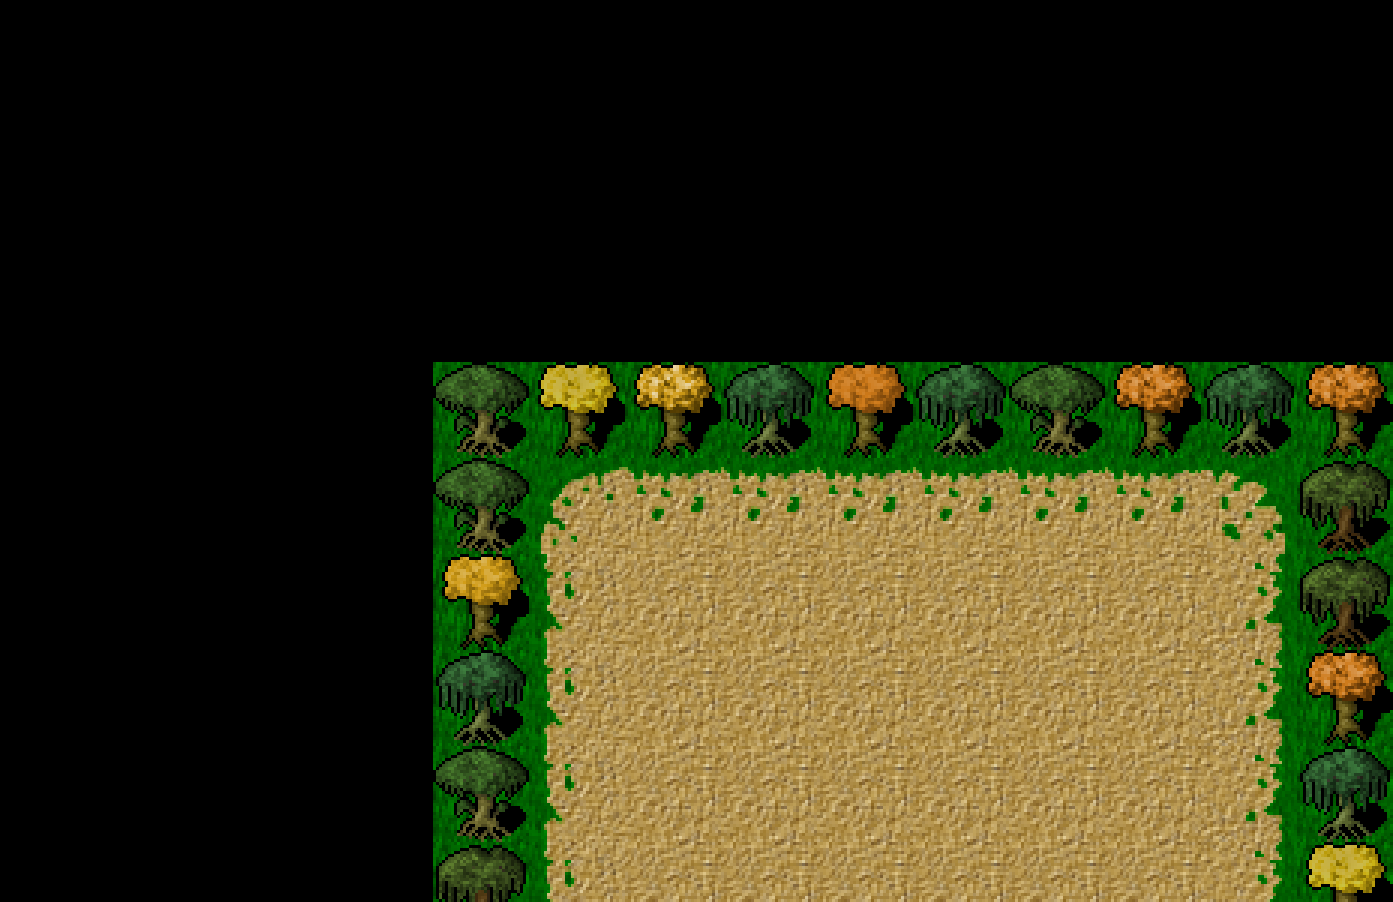 Loading a very basic tile map into the engine